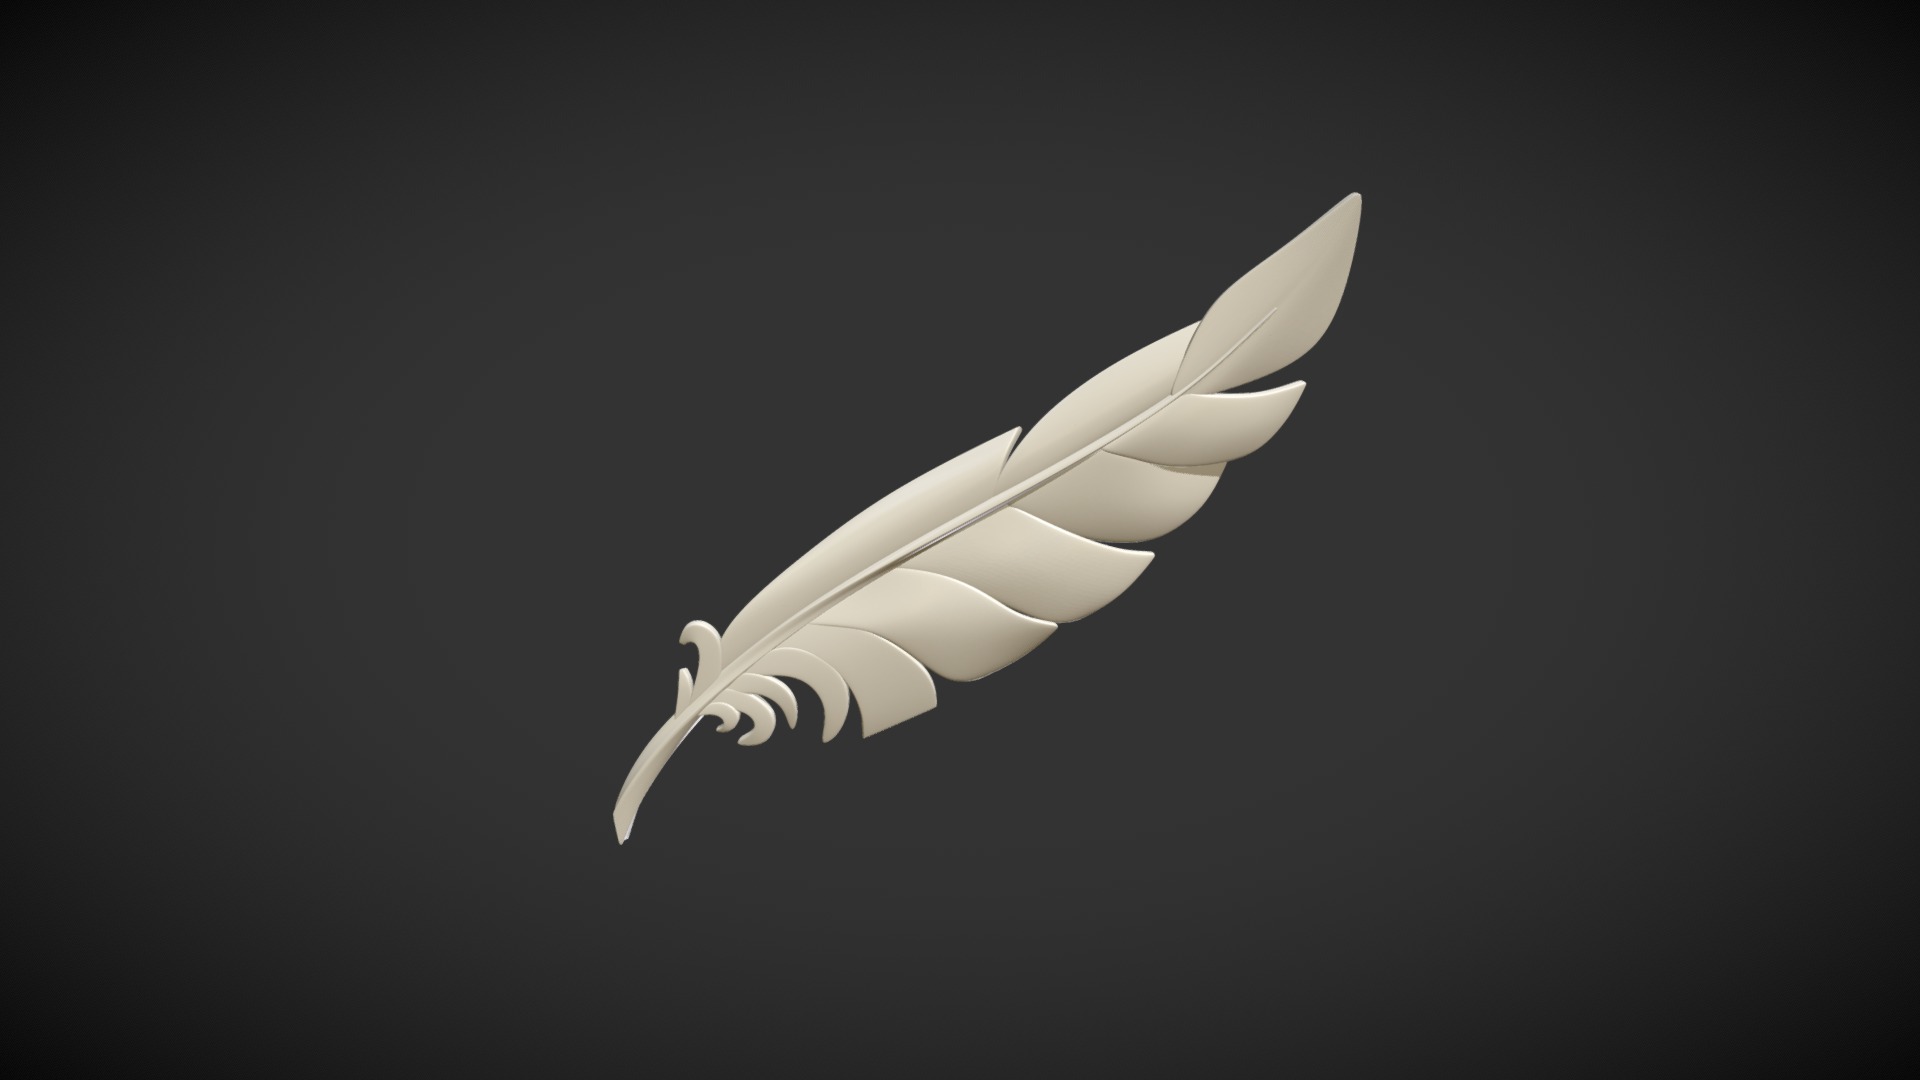 3D model New Feather - This is a 3D model of the New Feather. The 3D model is about a white logo with a black background.